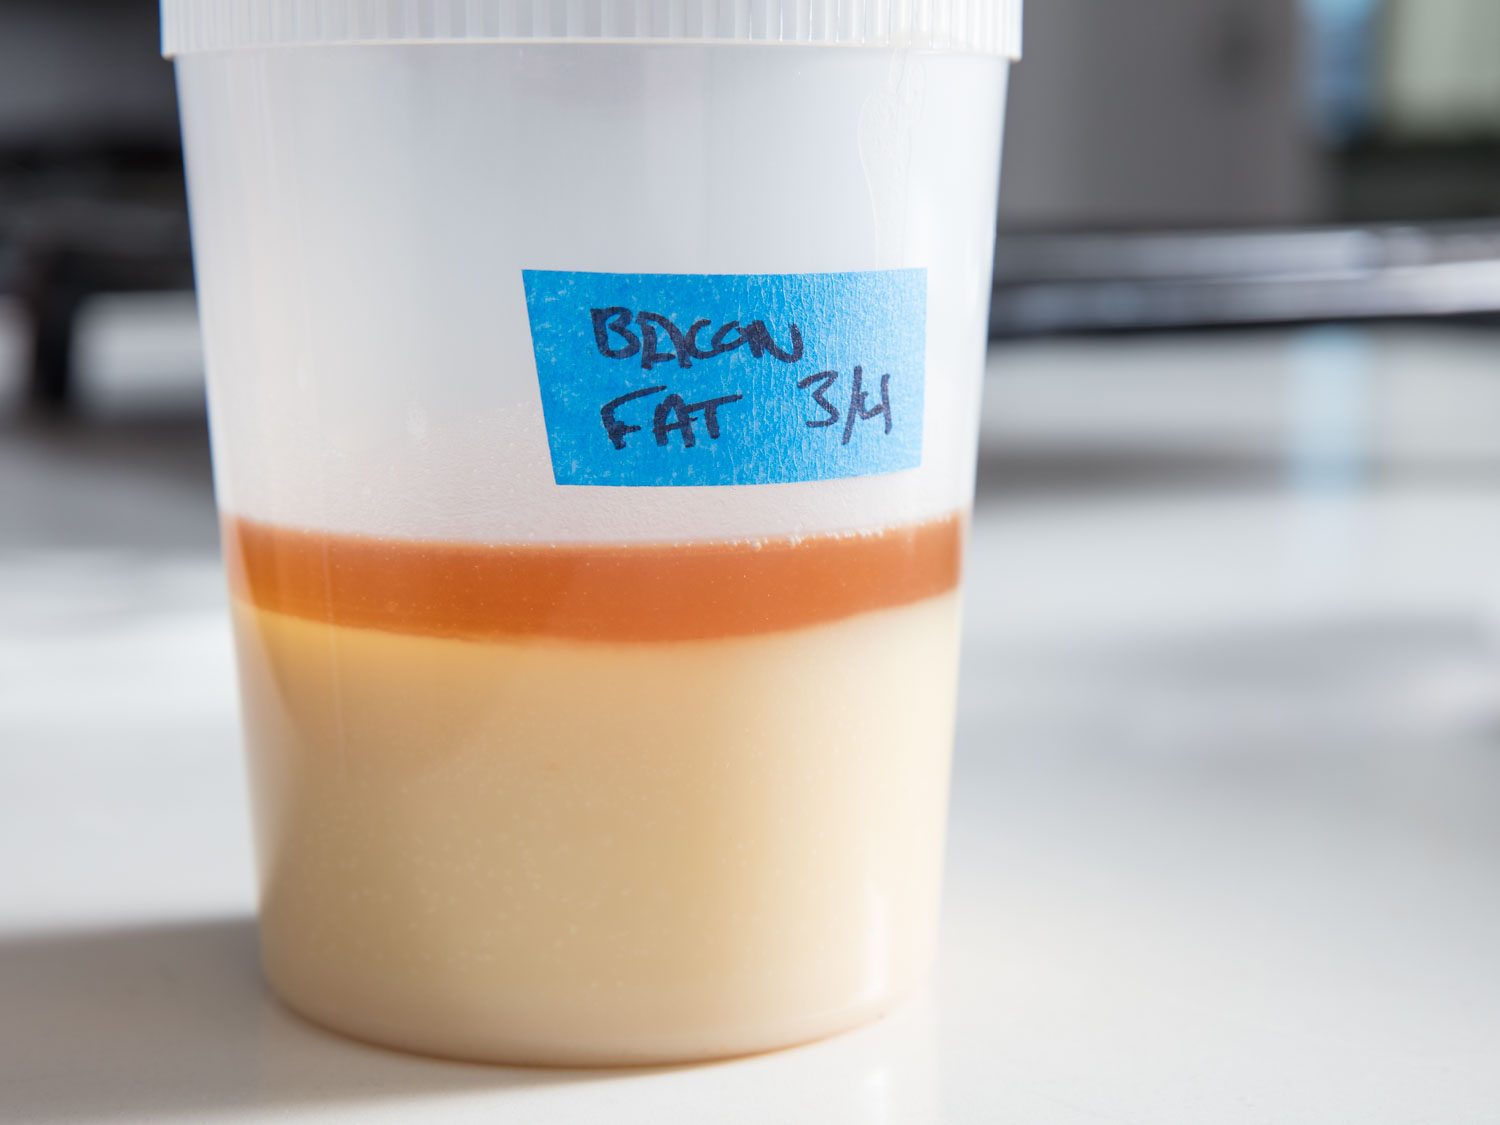 A plastic container of partly solidified bacon fat, labeled 